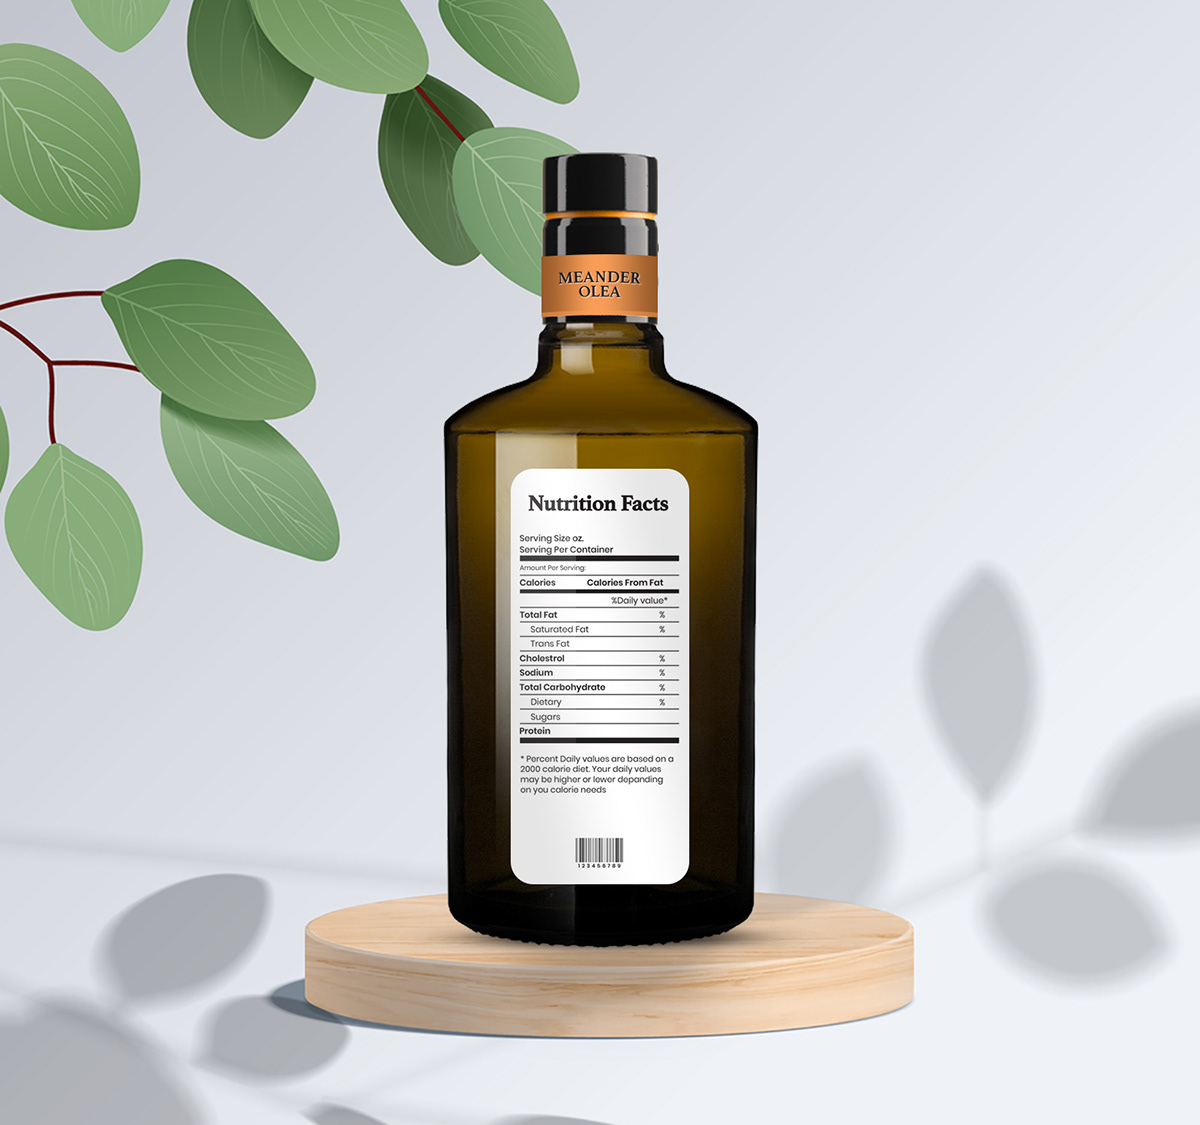 bottle bottle design bottle label bottle label design Label label design Olive Oil olive oil packaging product product packaging